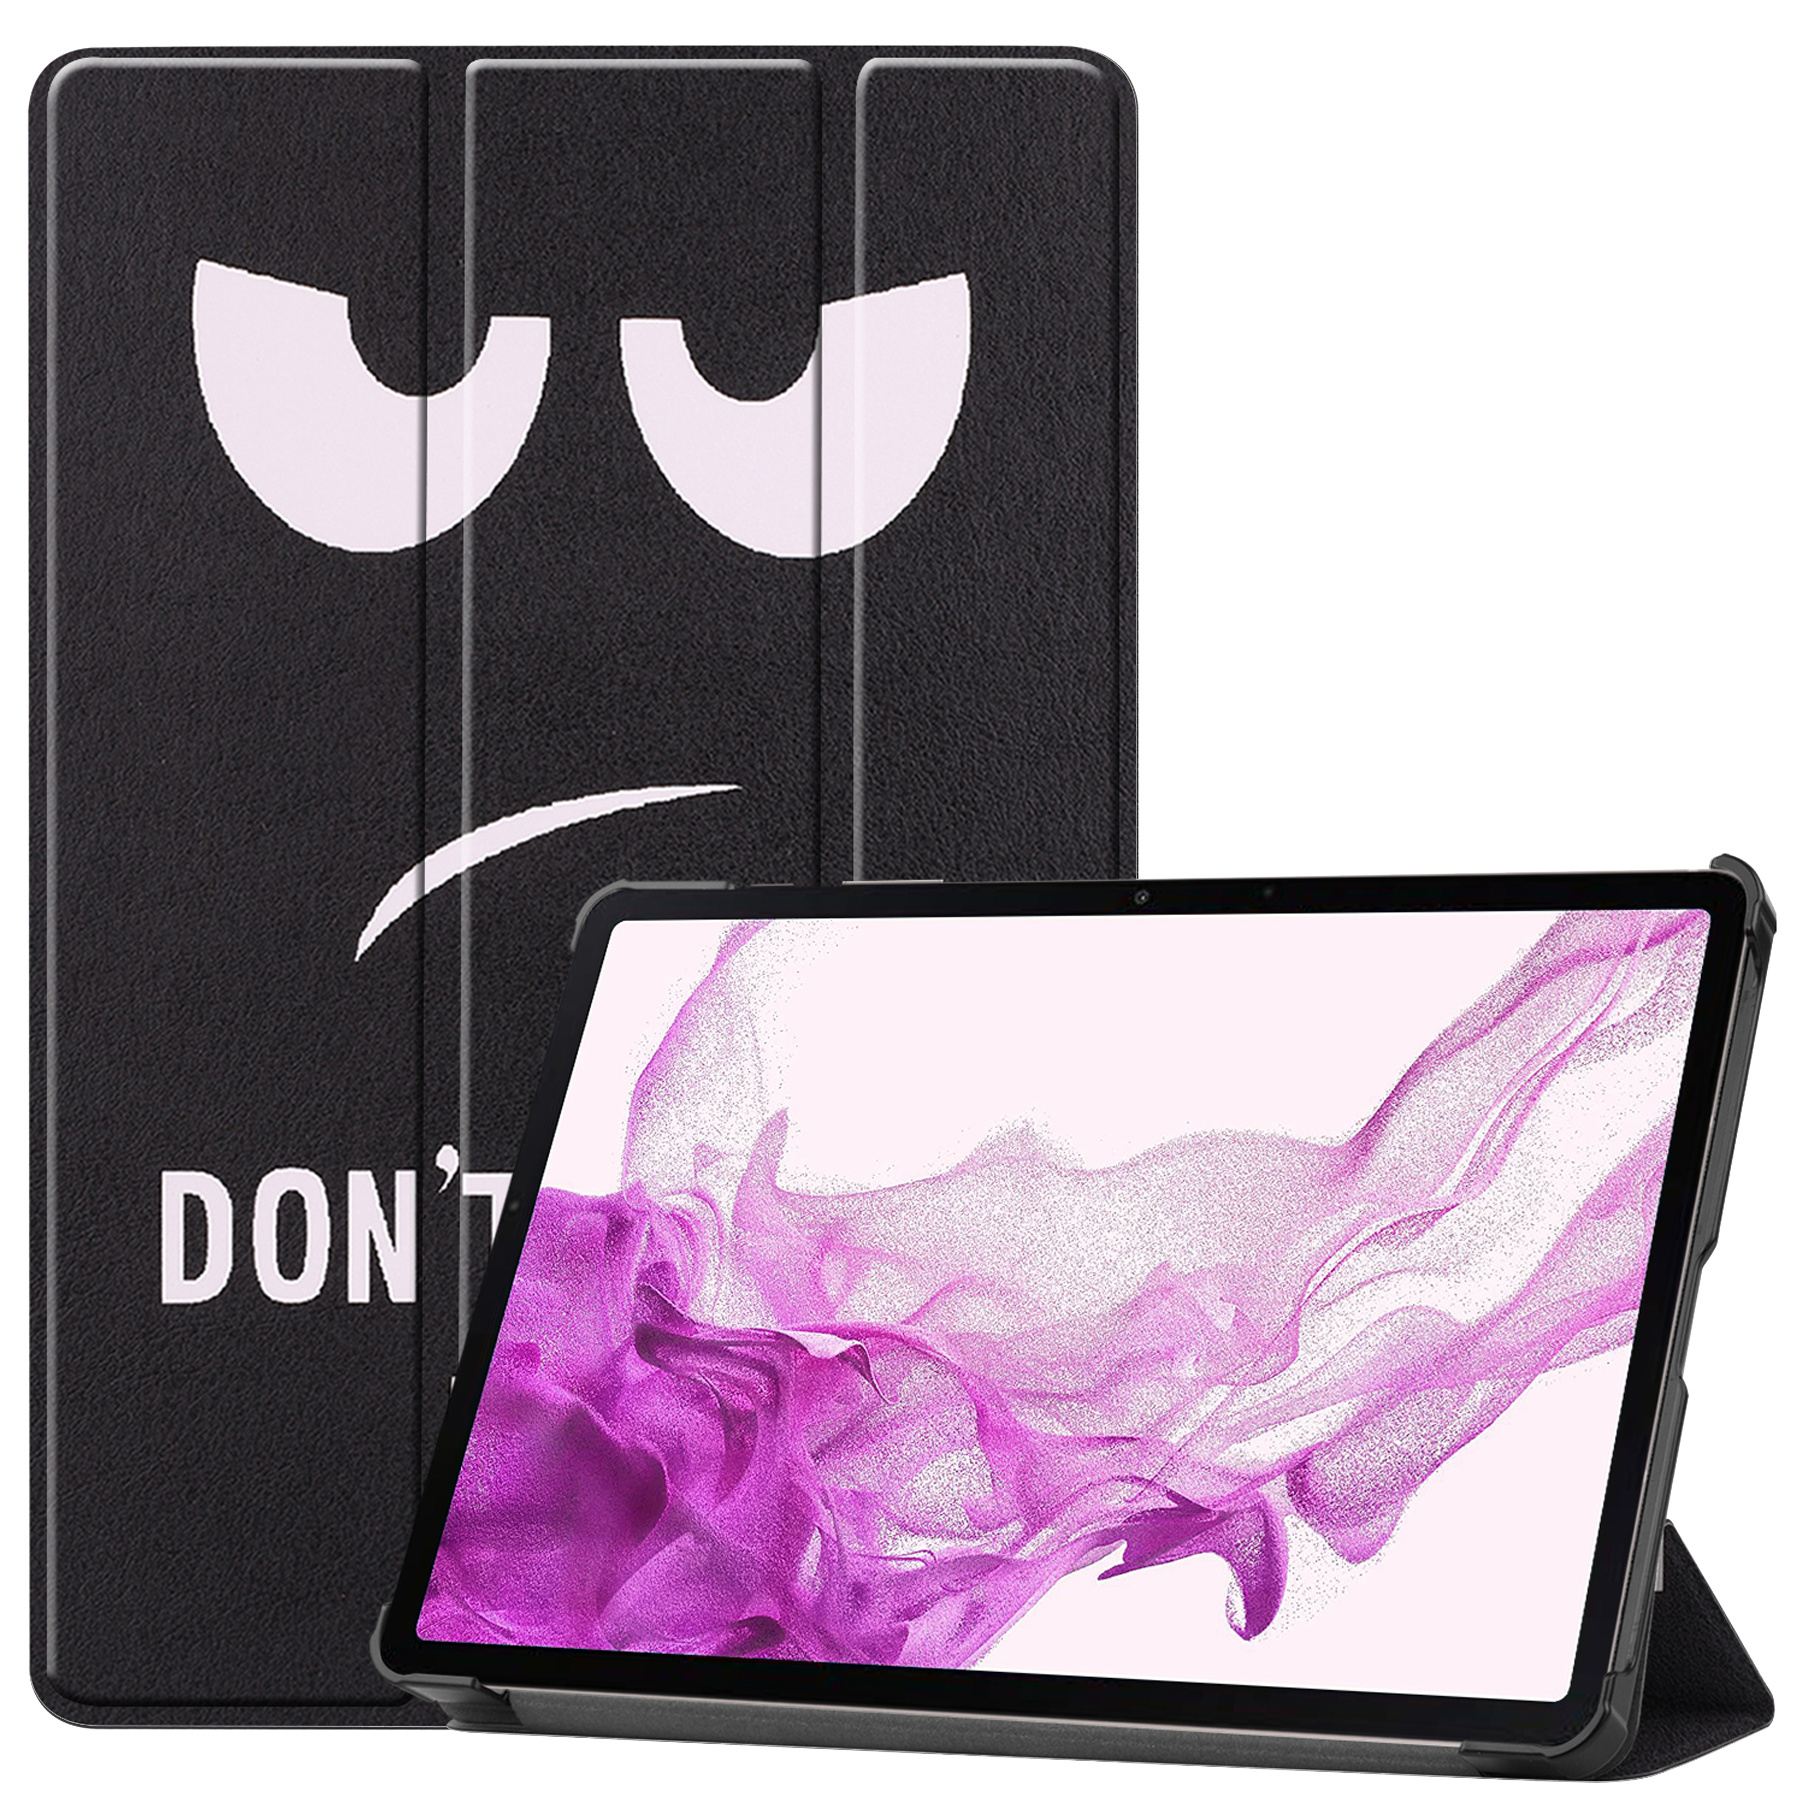 Nomfy Samsung Galaxy Tab S8 Hoesje 11 inch Case Don't Touch Me - Samsung Galaxy Tab S8 Hoes Hardcover Hoesje Bookcase Met Uitsparing S Pen - Don't Touch Me